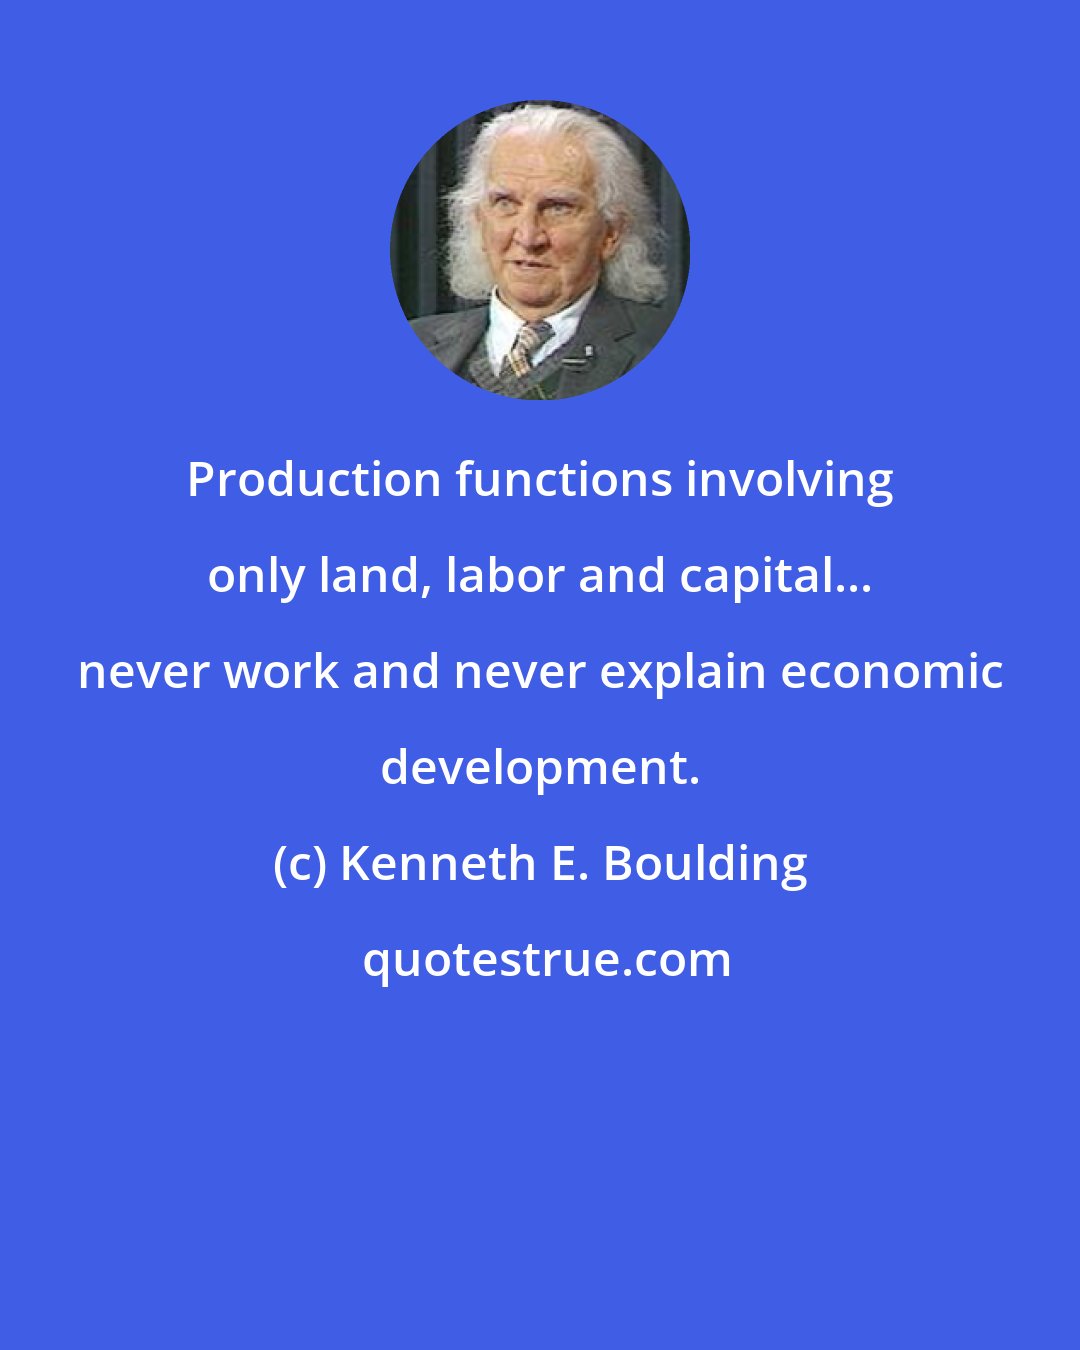 Kenneth E. Boulding: Production functions involving only land, labor and capital... never work and never explain economic development.